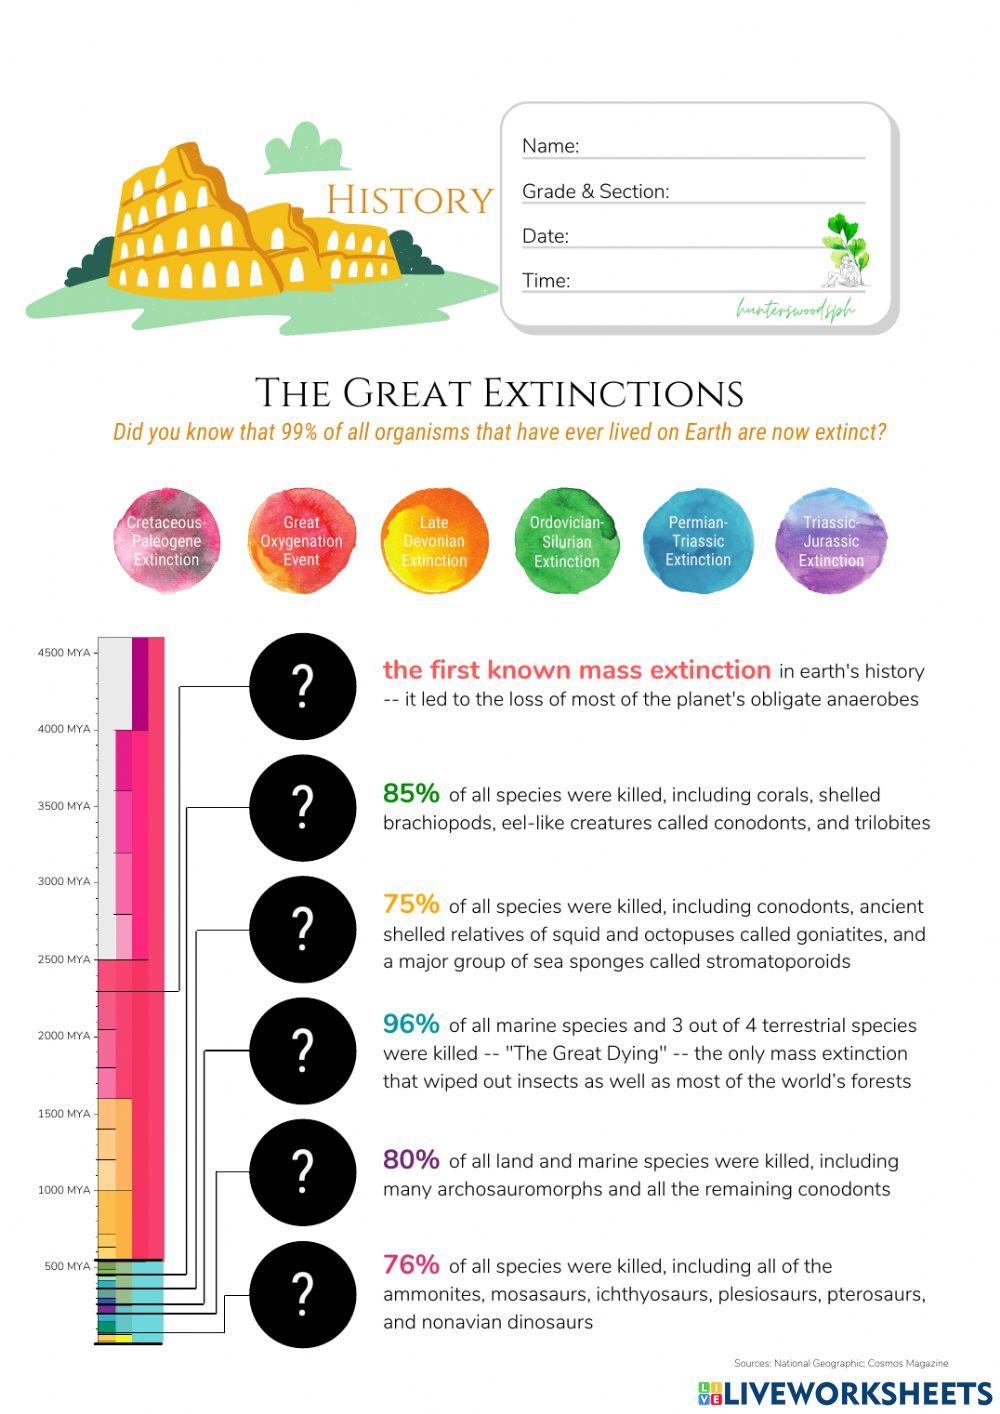 The Great Extinctions (HuntersWoodsPH Montessori History)